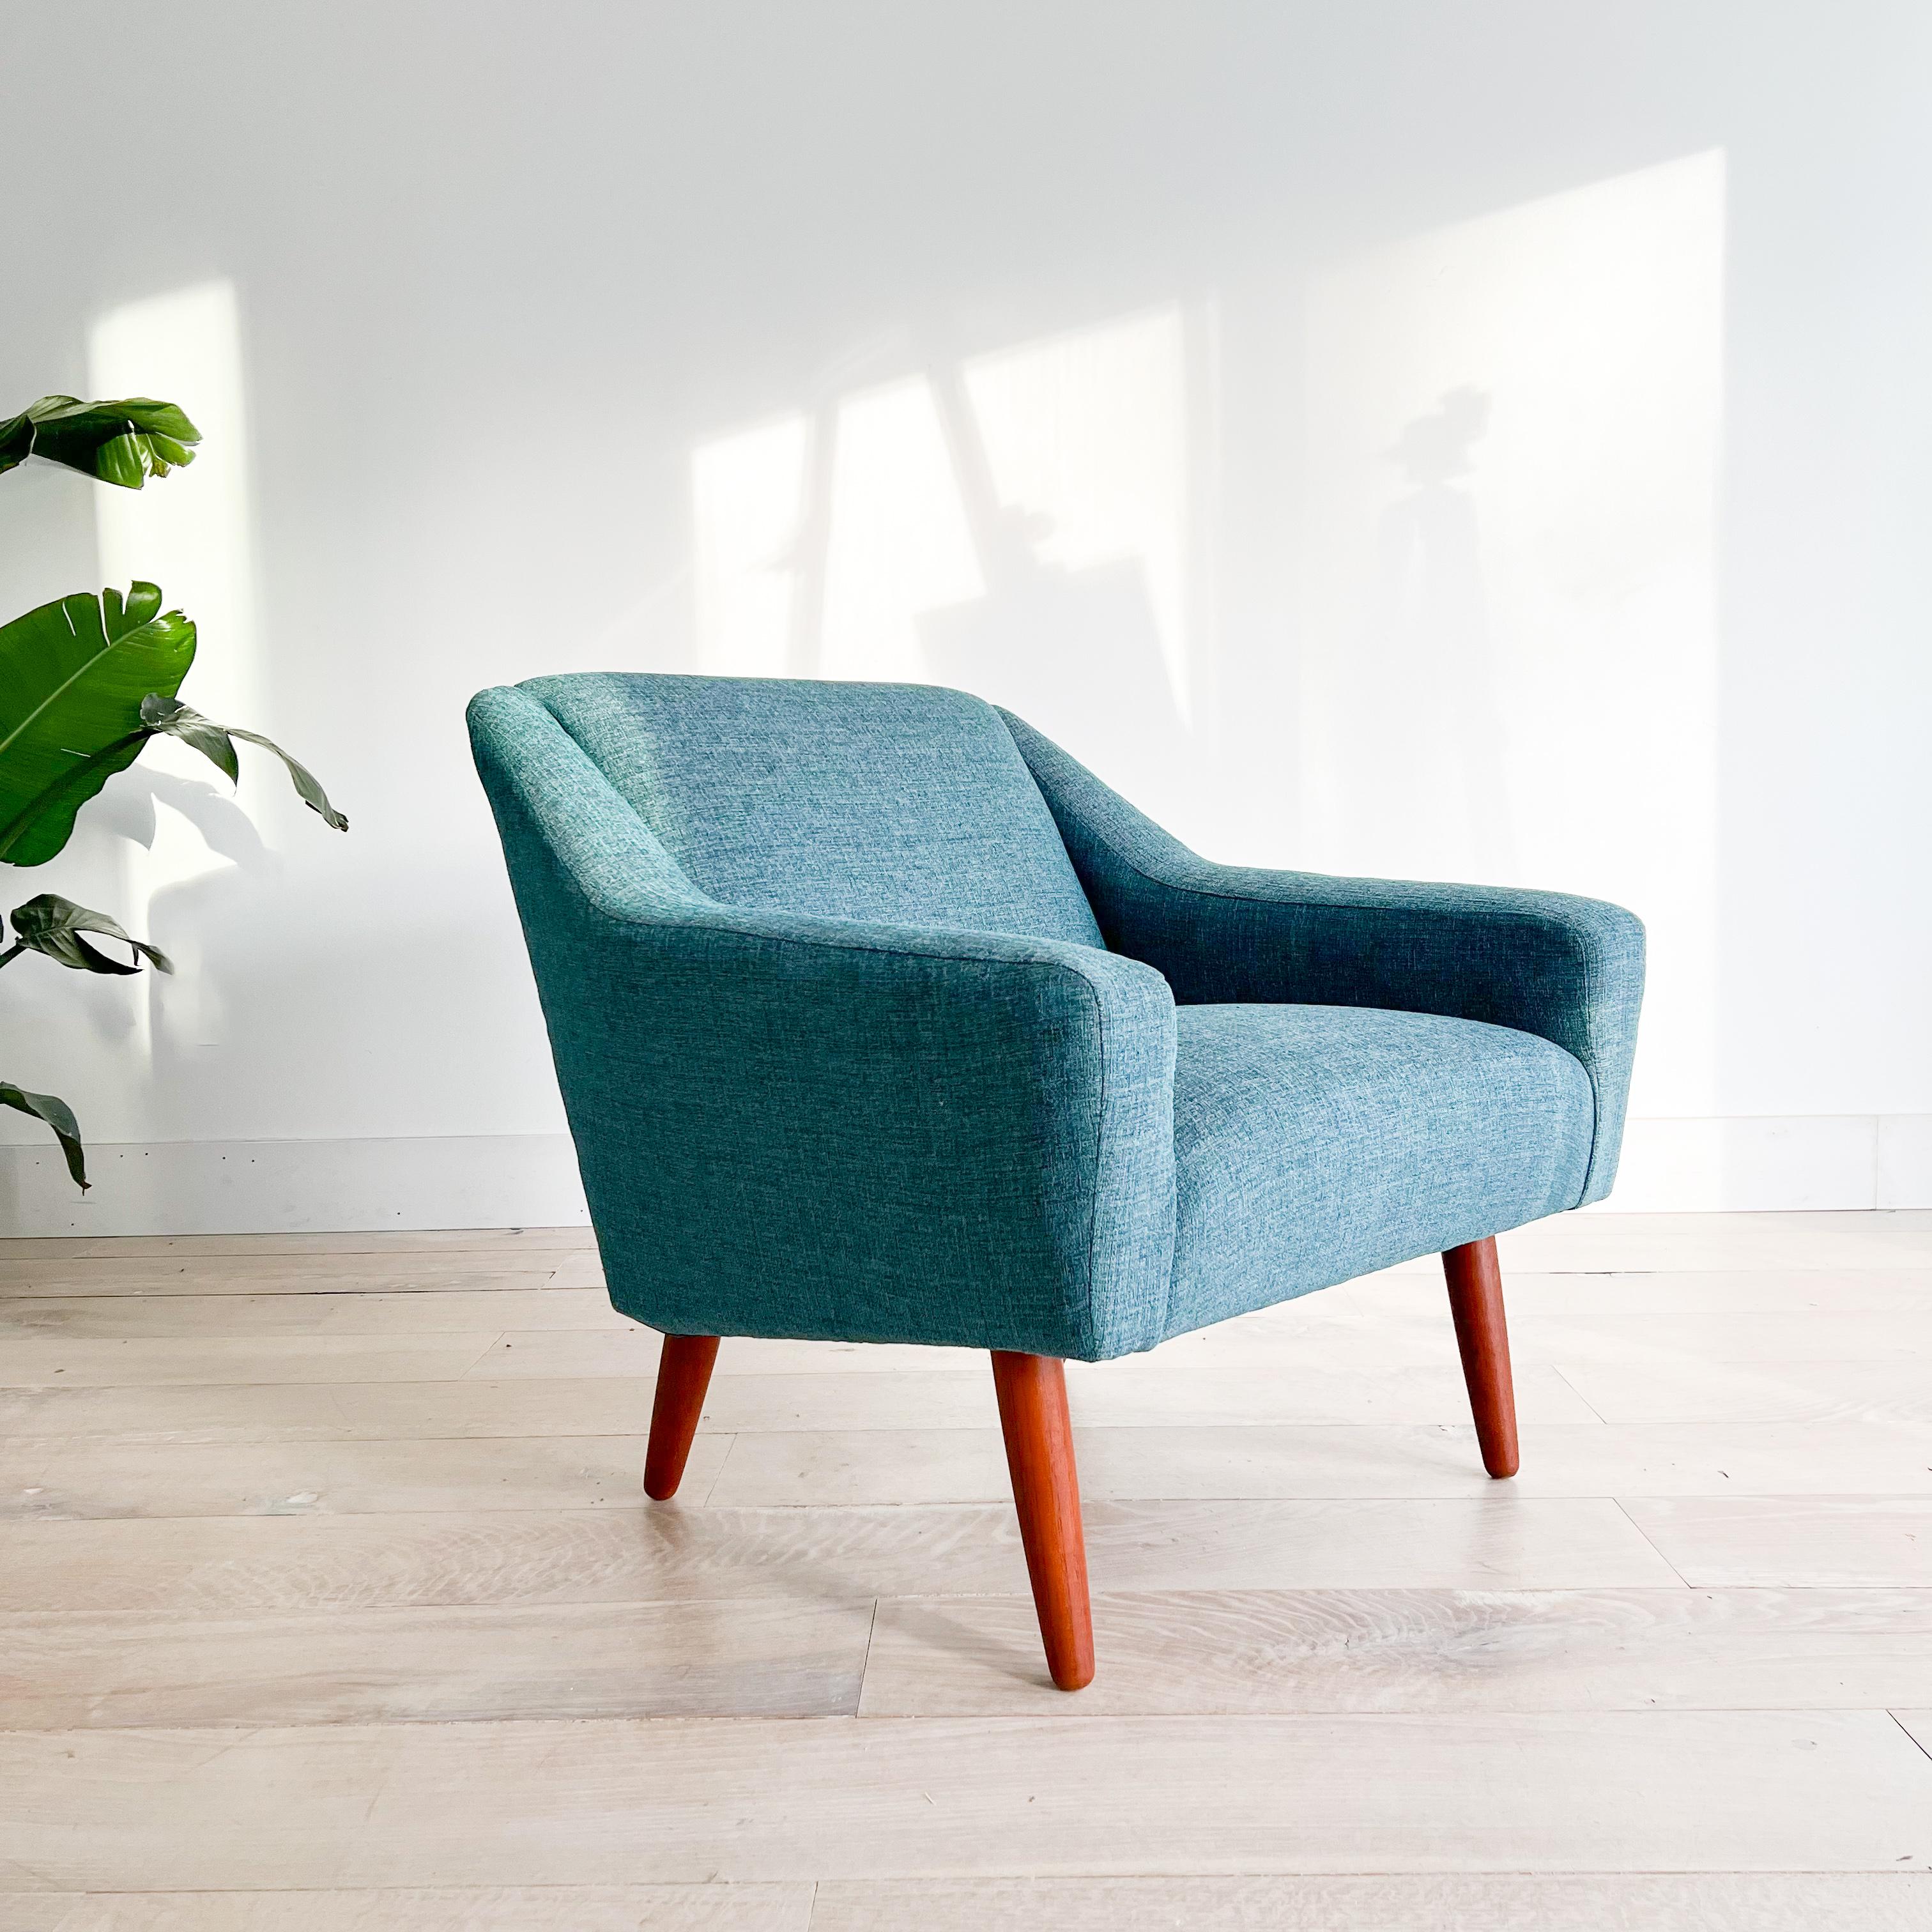 Introducing a mid-century modern lounge chair by Illum Wikkelso. Newly upholstered in a tasteful teal fabric with fresh foam for optimal comfort. The chair, measuring 32 inches by 32 inches, boasts a comfortable seated height of 16.5 inches and an